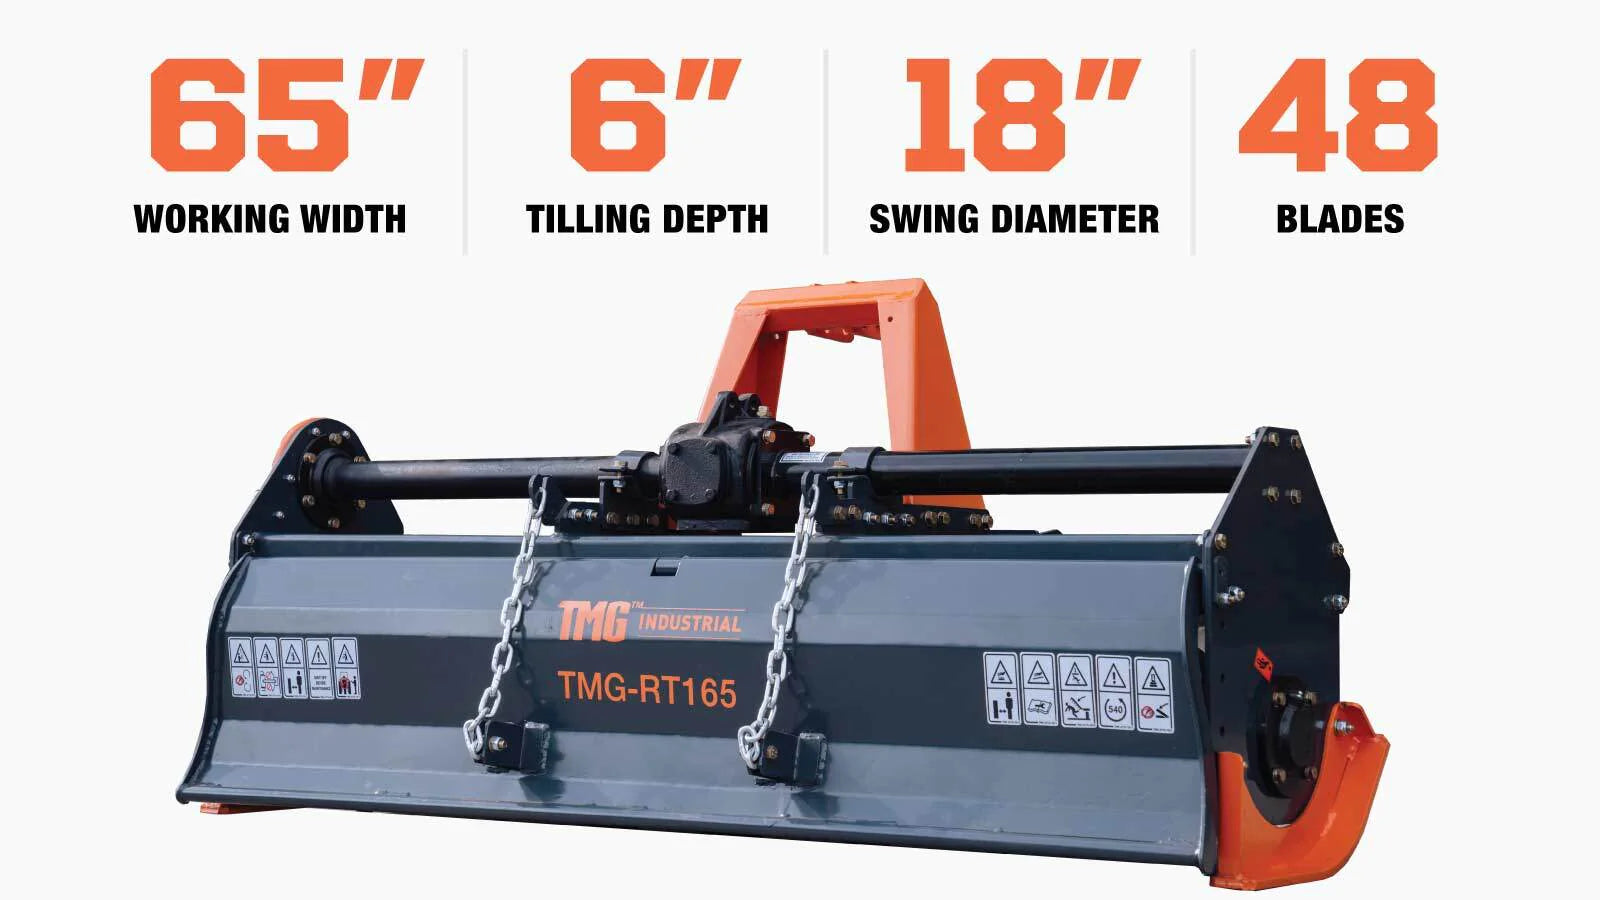 TMG Industrial 65” 3-Point Hitch Rotary Tiller, 30-50 HP Tractor, 6” Tilling Depth, PTO Shaft Included, Category 1 & 2 Hookup, TMG-RT165-description-image